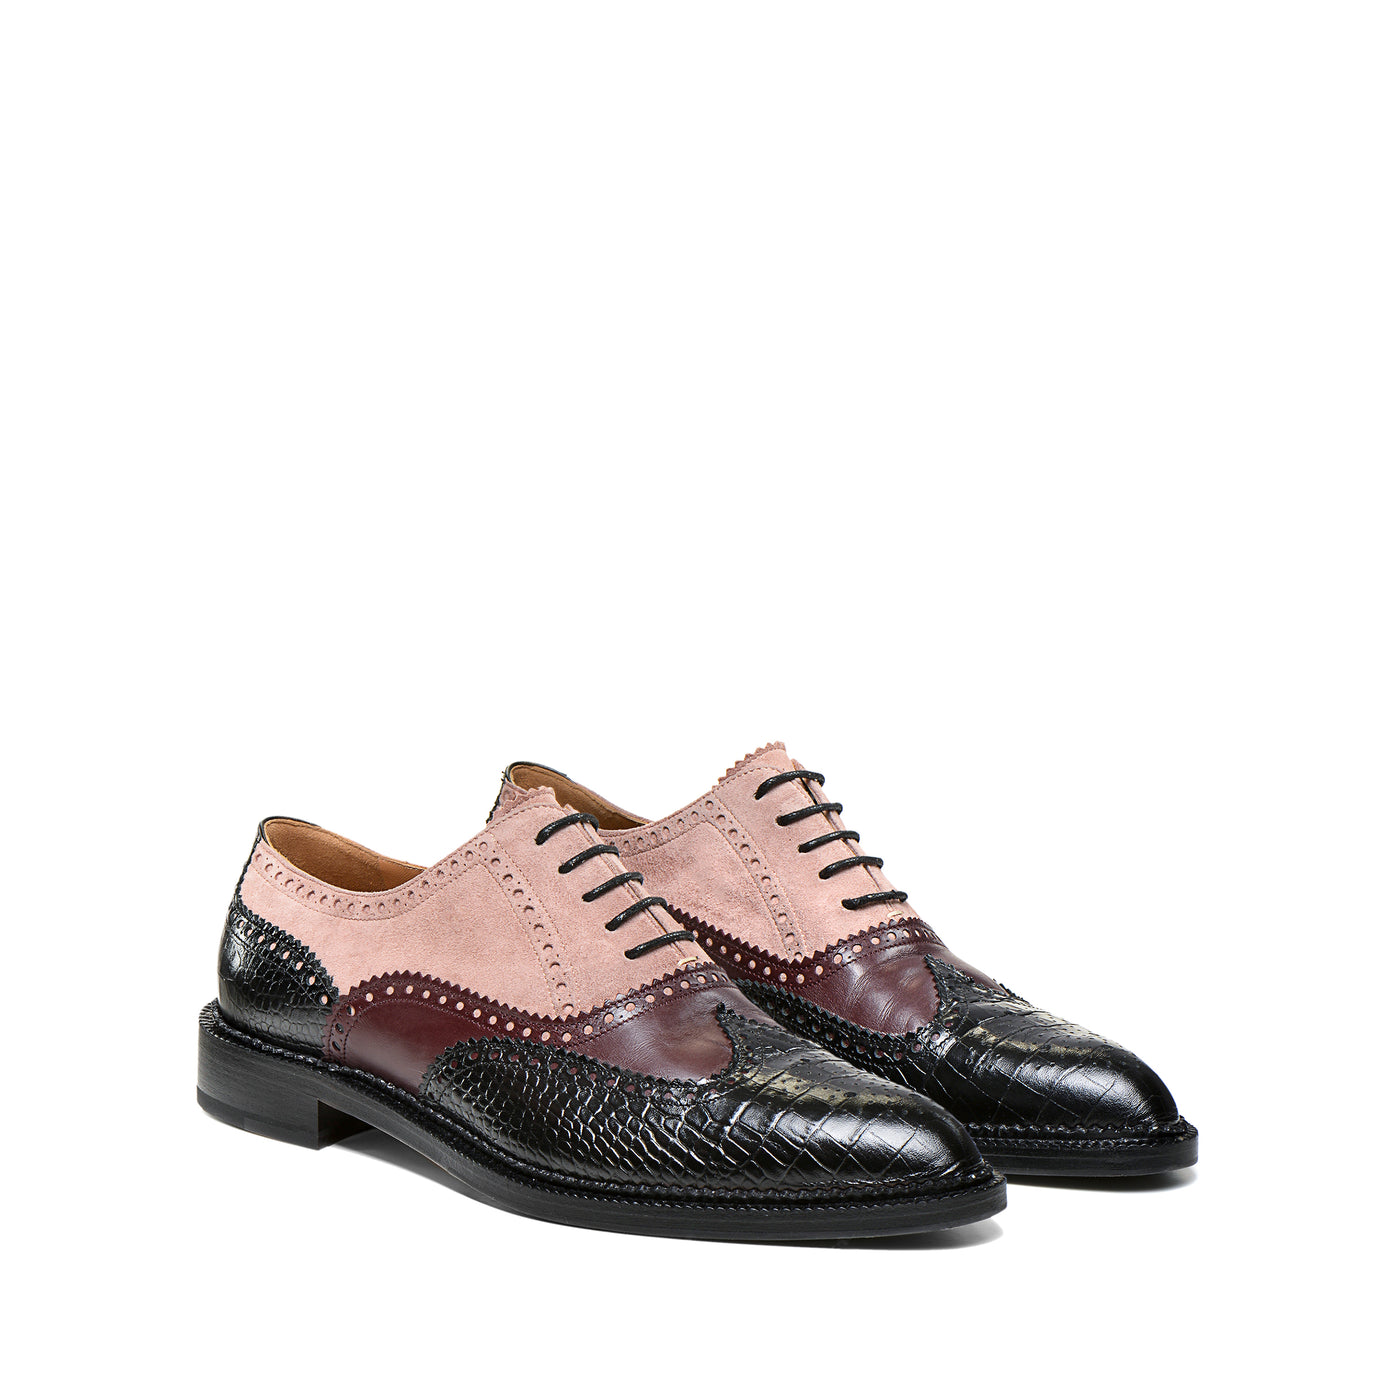 Shop The Latest Collection Of Fratelli Rossetti Woman Leather Lace-Up 66845 In Lebanon